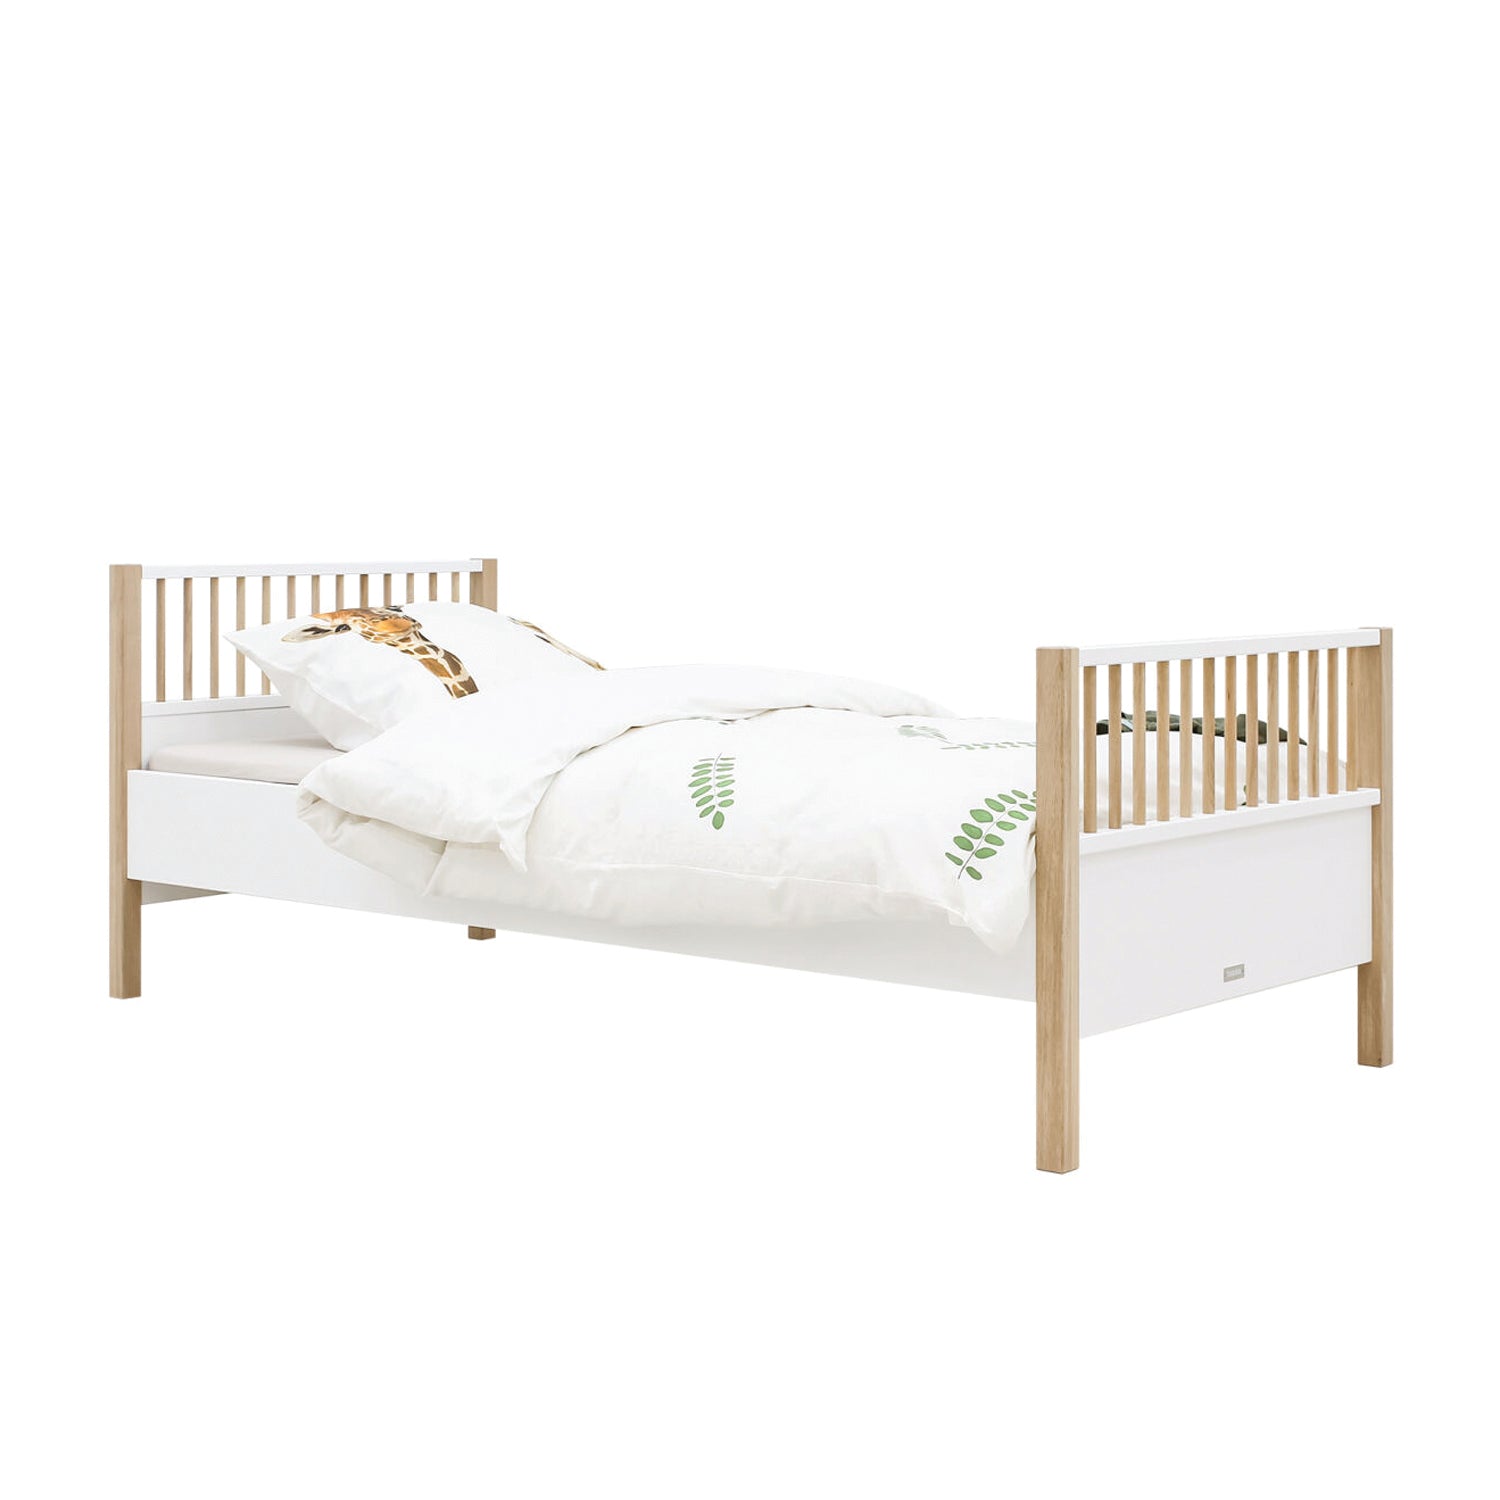 Deer Industries Kids Furniture Shop Singapore, Kids Furniture Store Singapore, Kids Beds Singapore, Oak White Bed, Single Bed with trundle, Single Bed with storage drawer, Kids Single Bed